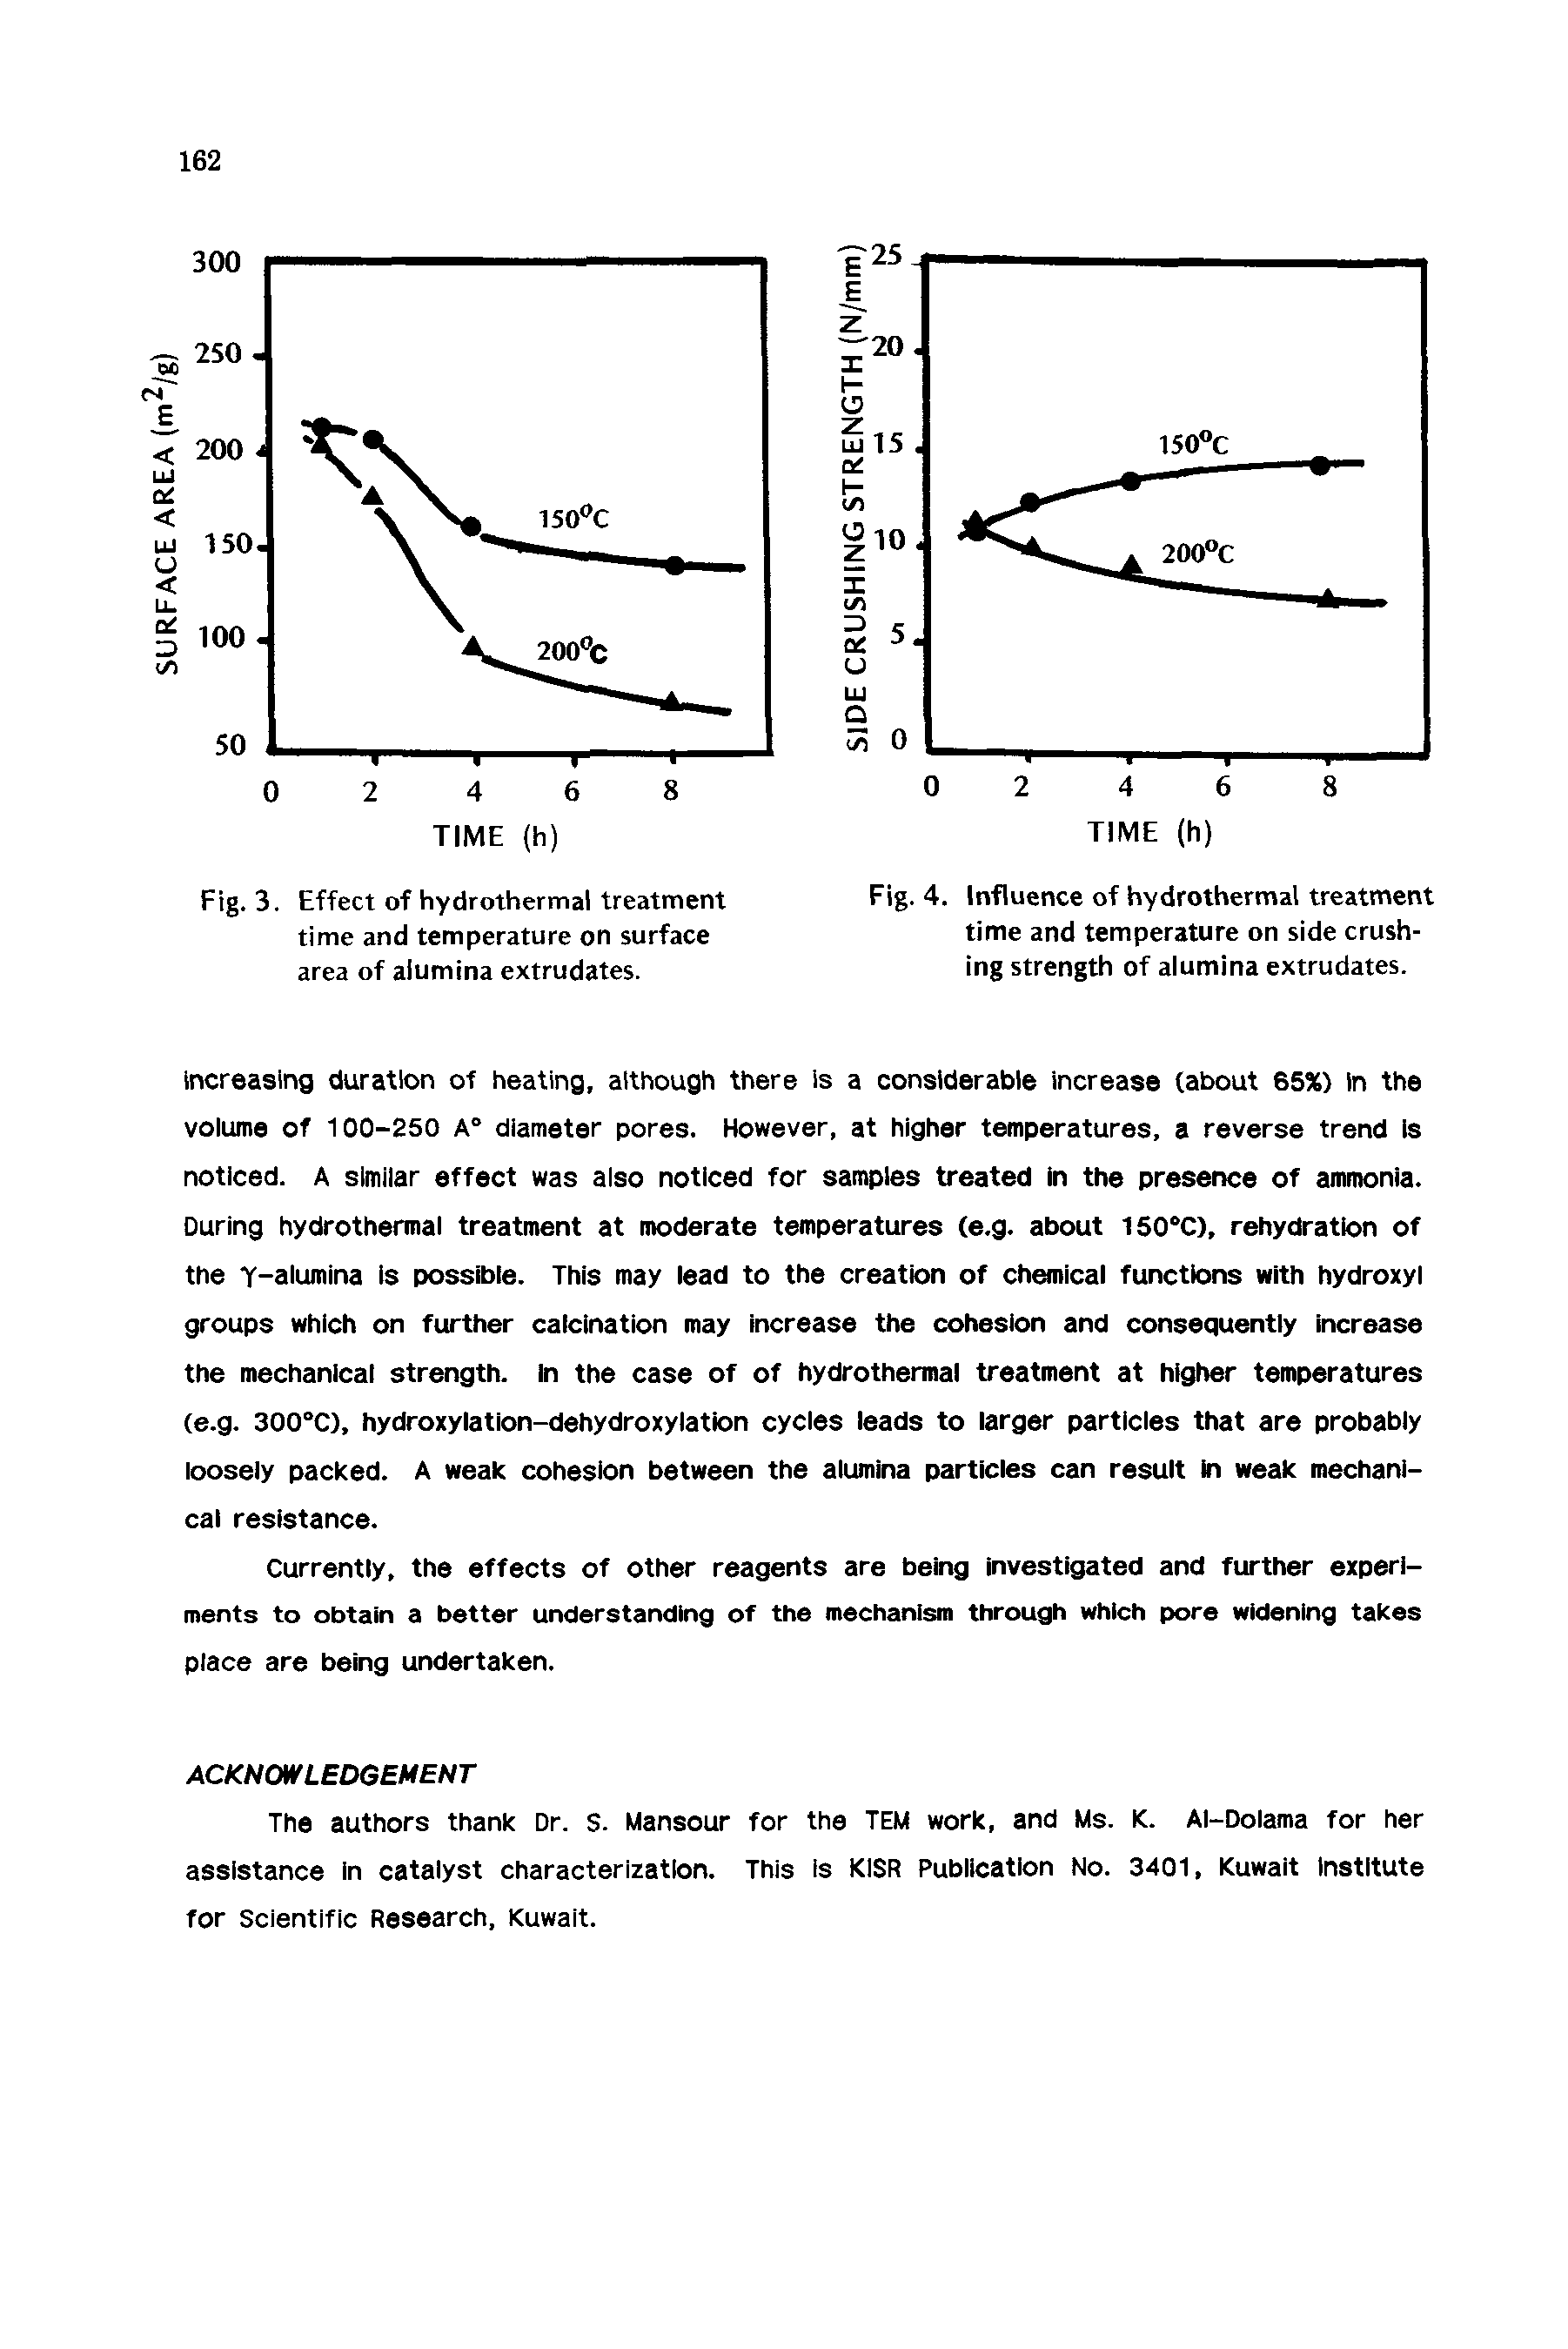 Fig. 4. Influence of hydrothermal treatment time and temperature on side crushing strength of alumina extrudates.